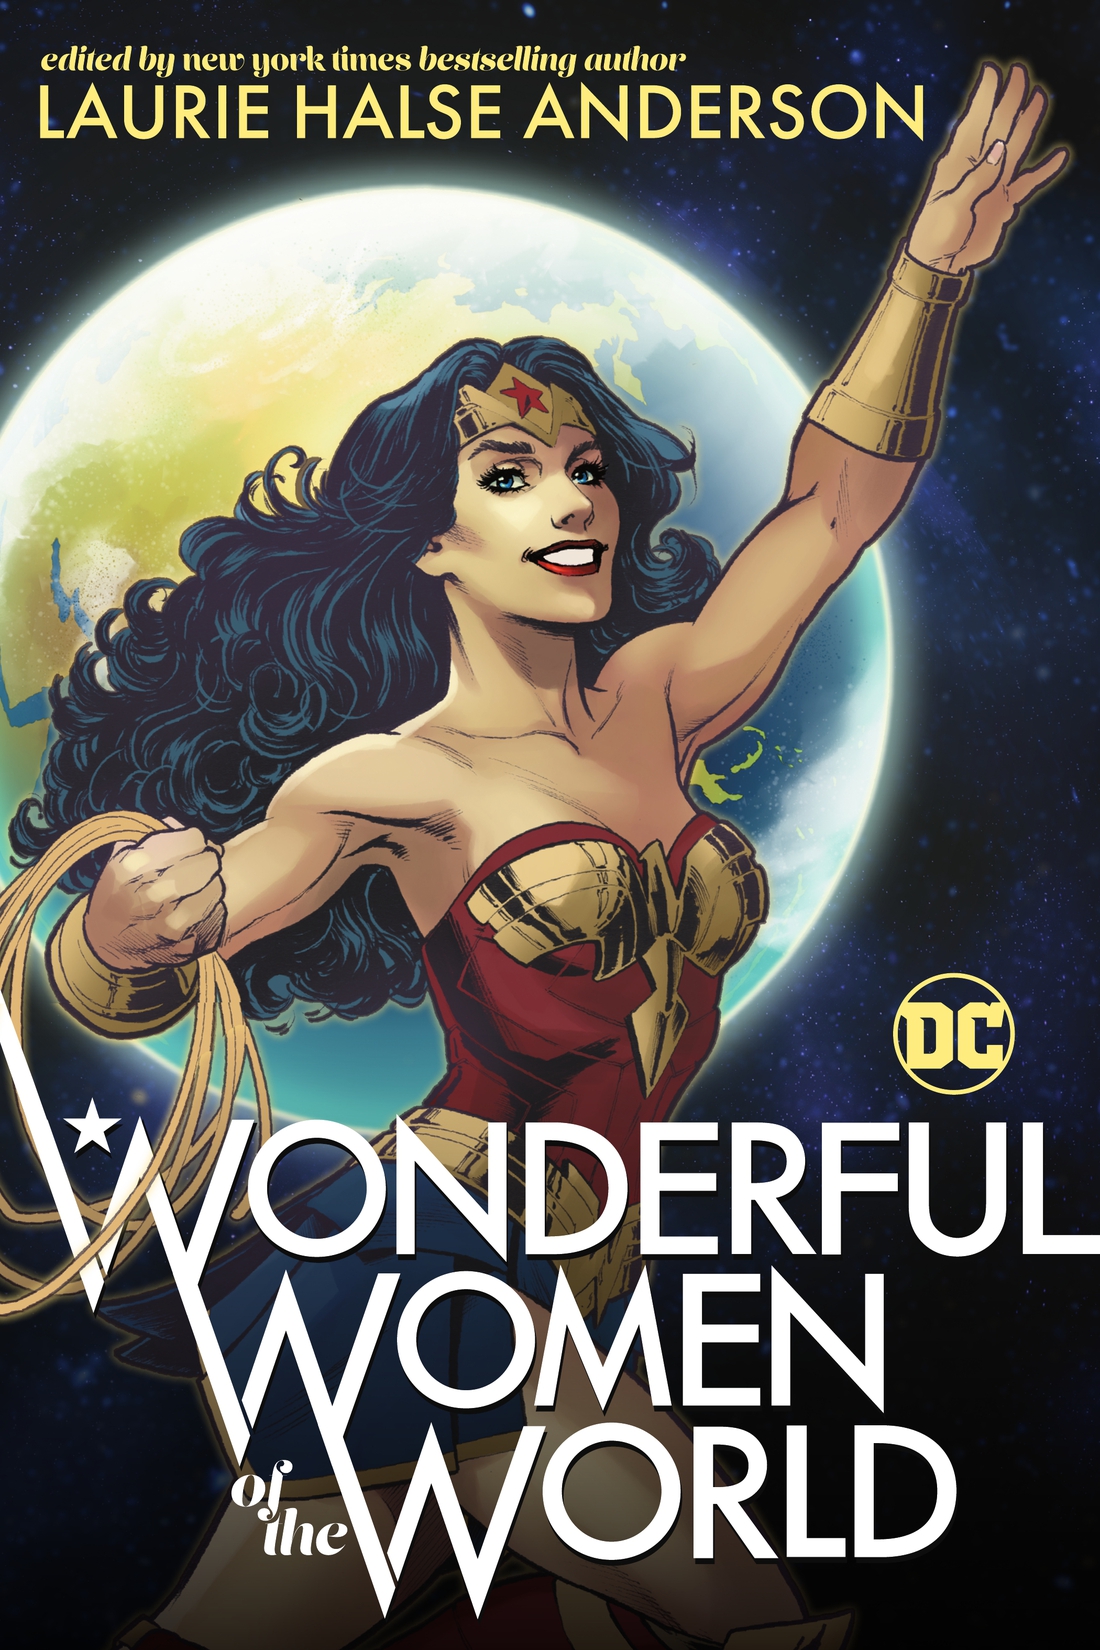 Wonderful Women of the World preview images